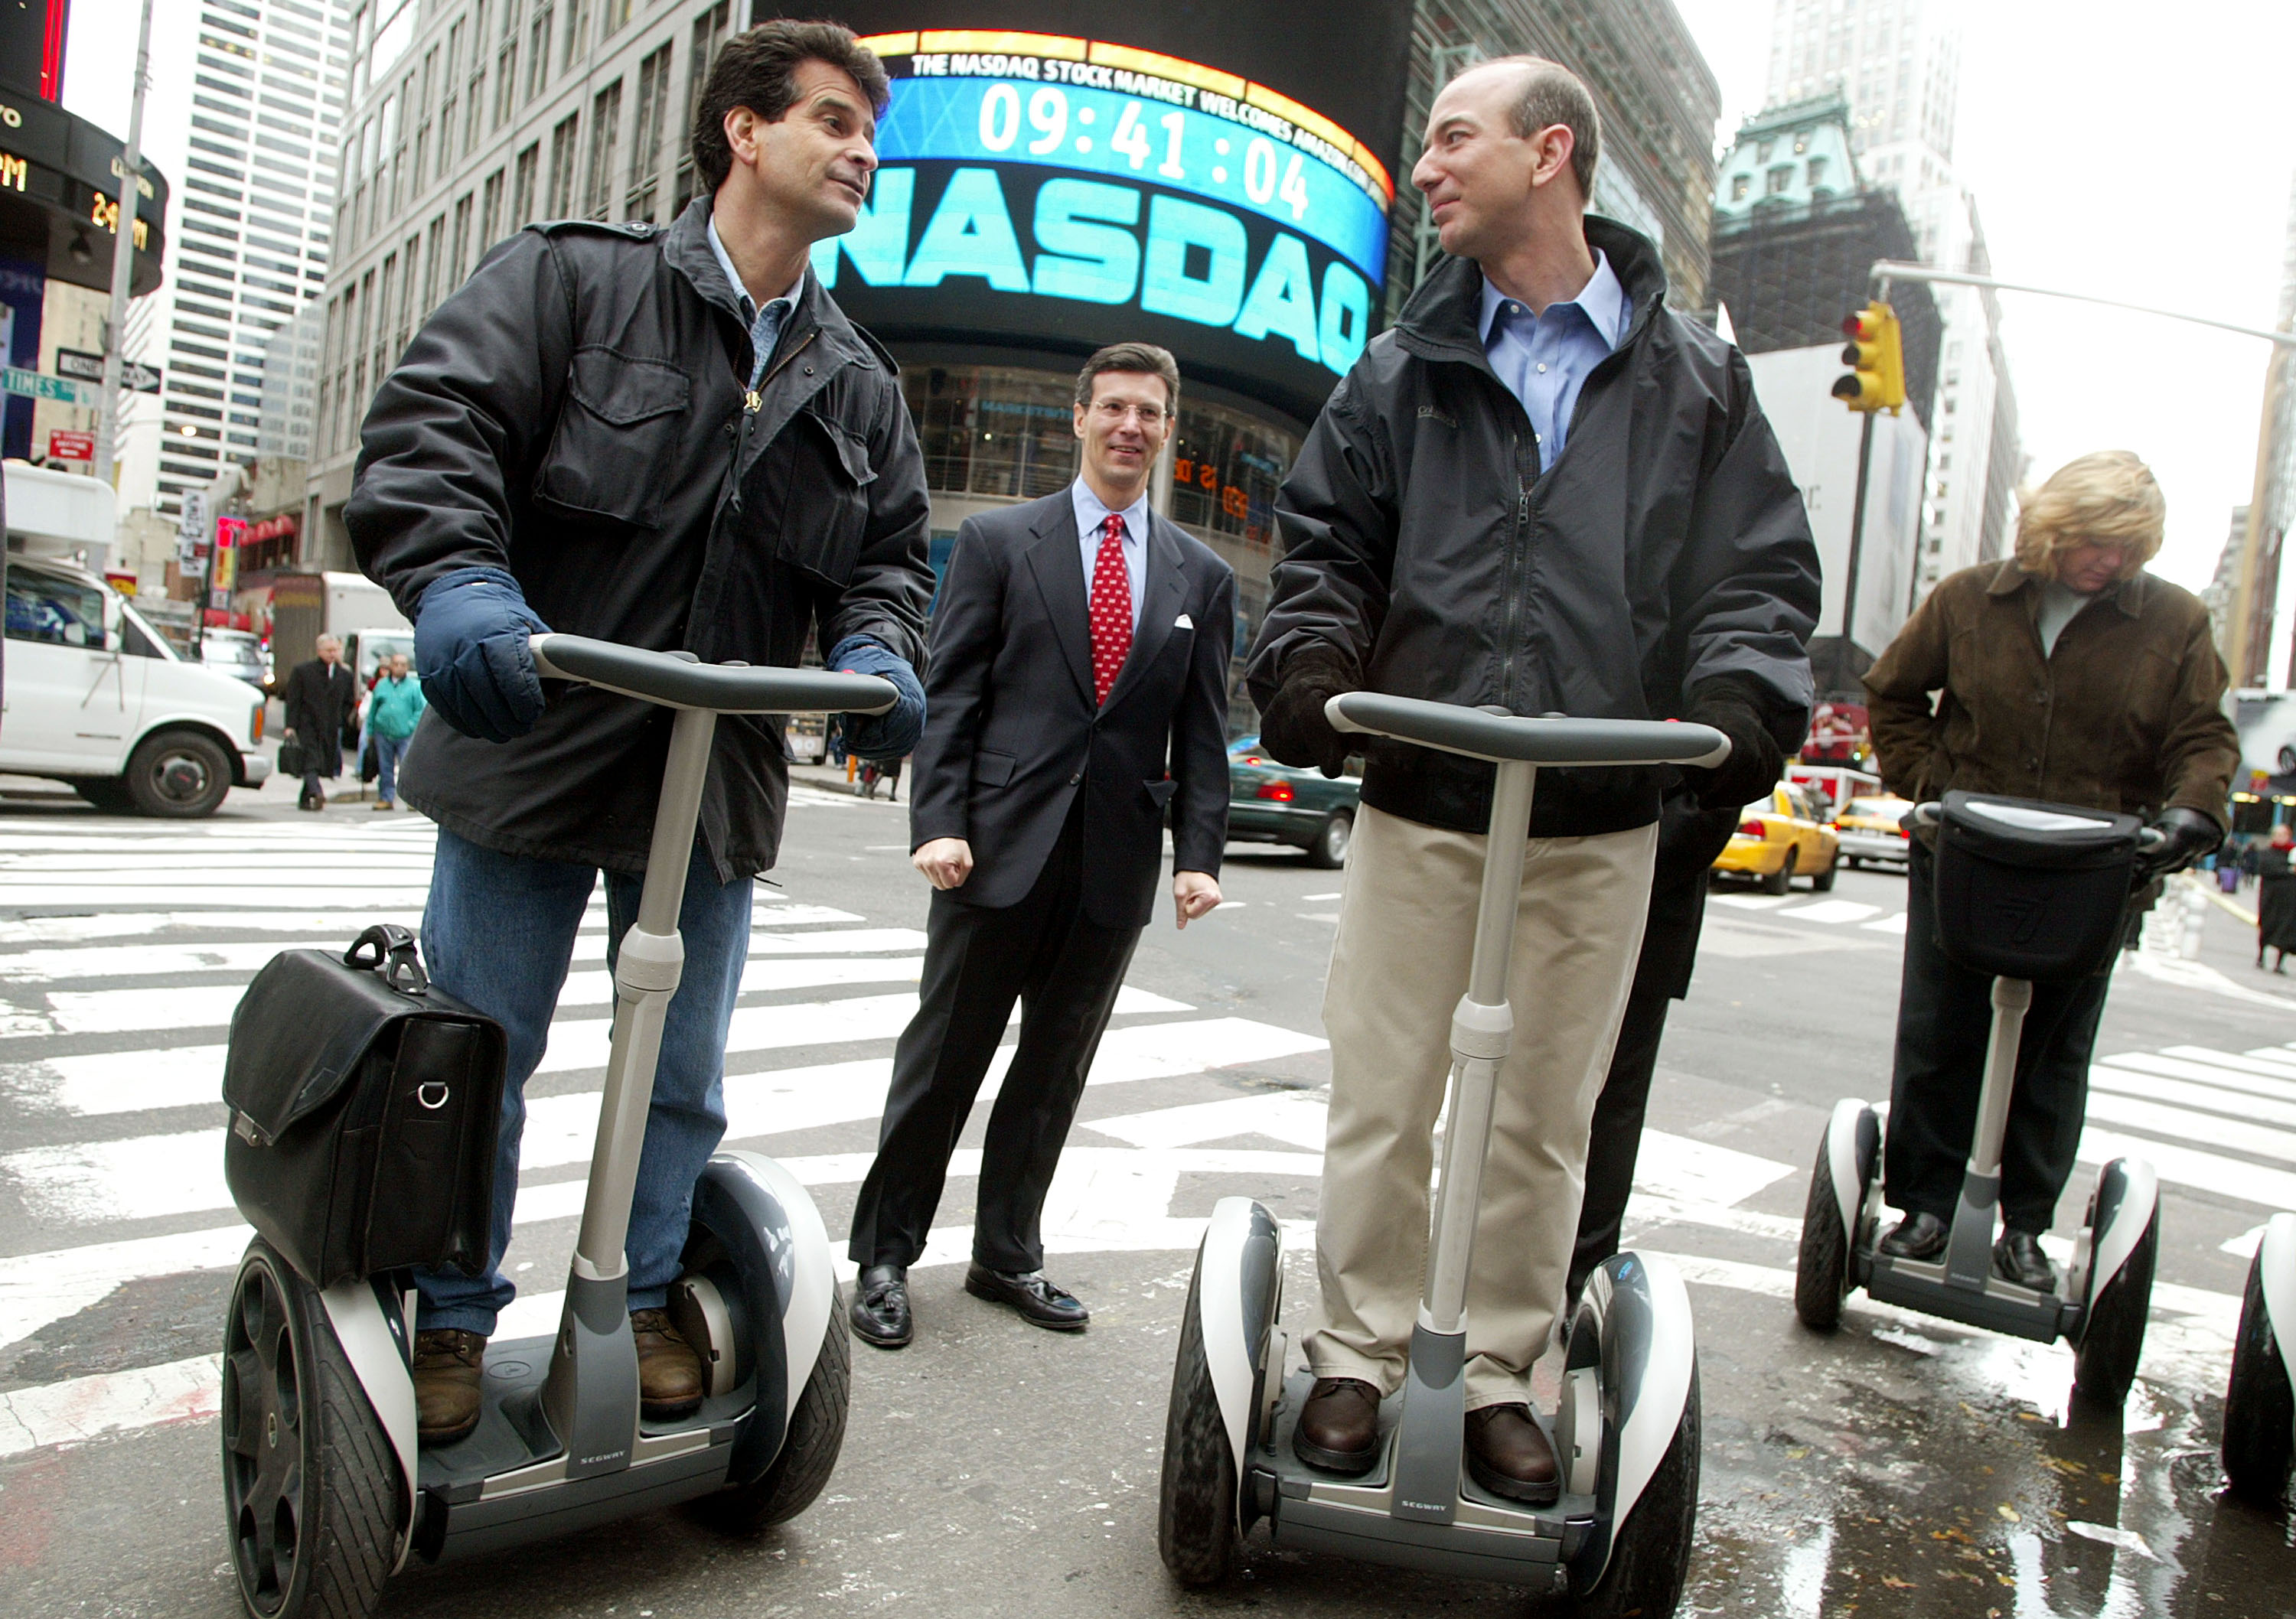 Amazon.com CEO Jeff Bezos (R) stands on a Segway with Segway inventor Dean Kamen (L) and NASDAQ Vice Chairman David Weild (C) after opening the NASDAQ Stock Market November 18, 2002 in New York City